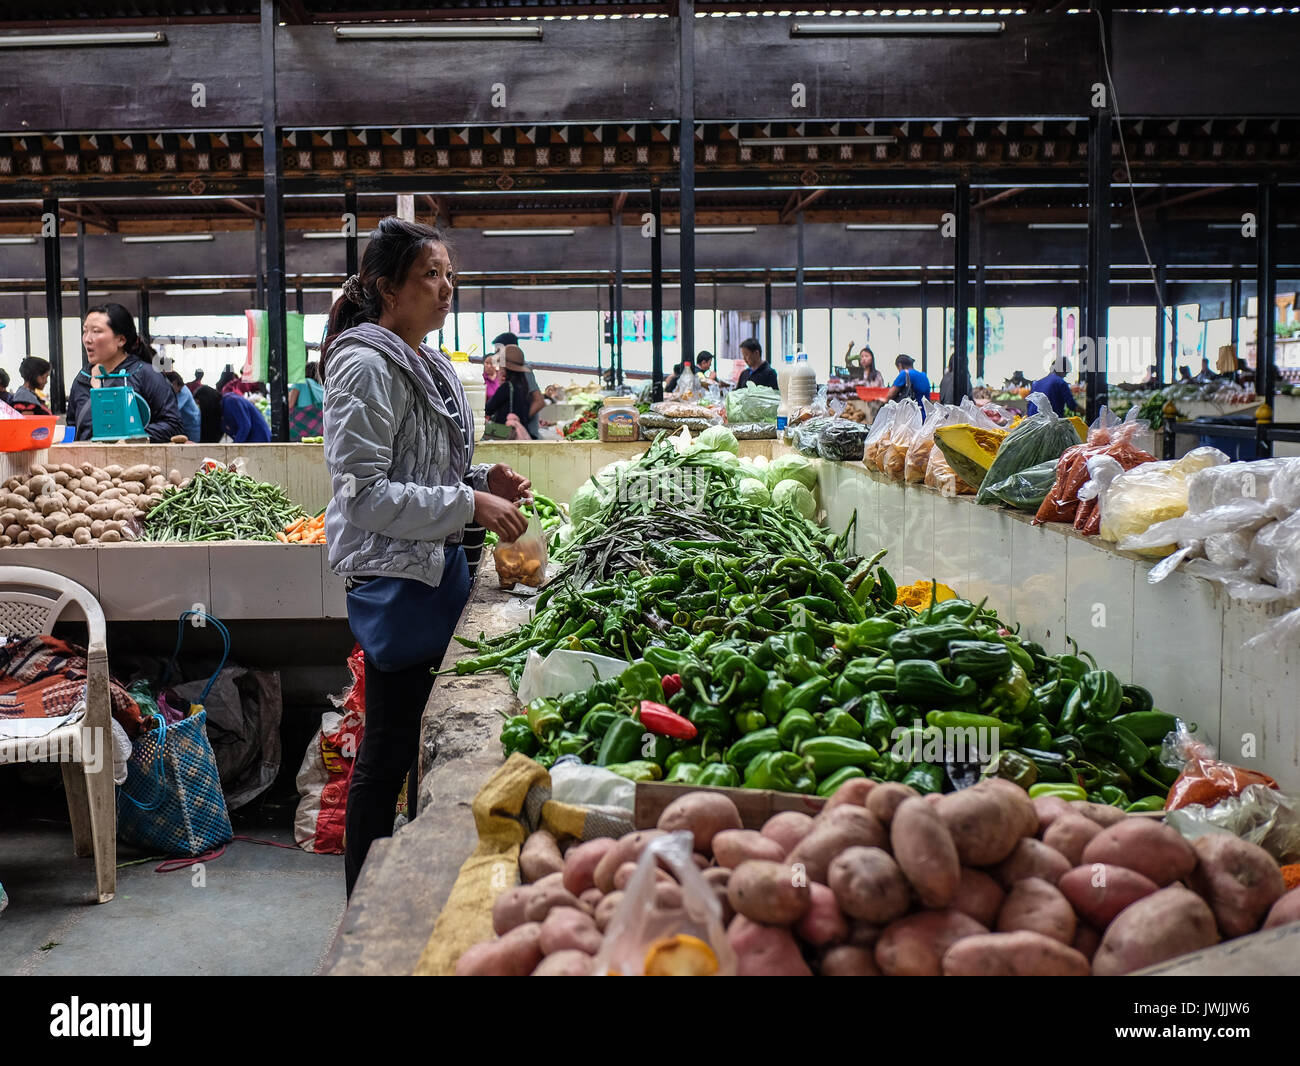 Thimphu, Bhutan - Aug 29, 2015. A woman at rural market in Thimphu, Bhutan. In South Asia, Bhutan ranks first in economic freedom, ease of doing busin Stock Photo